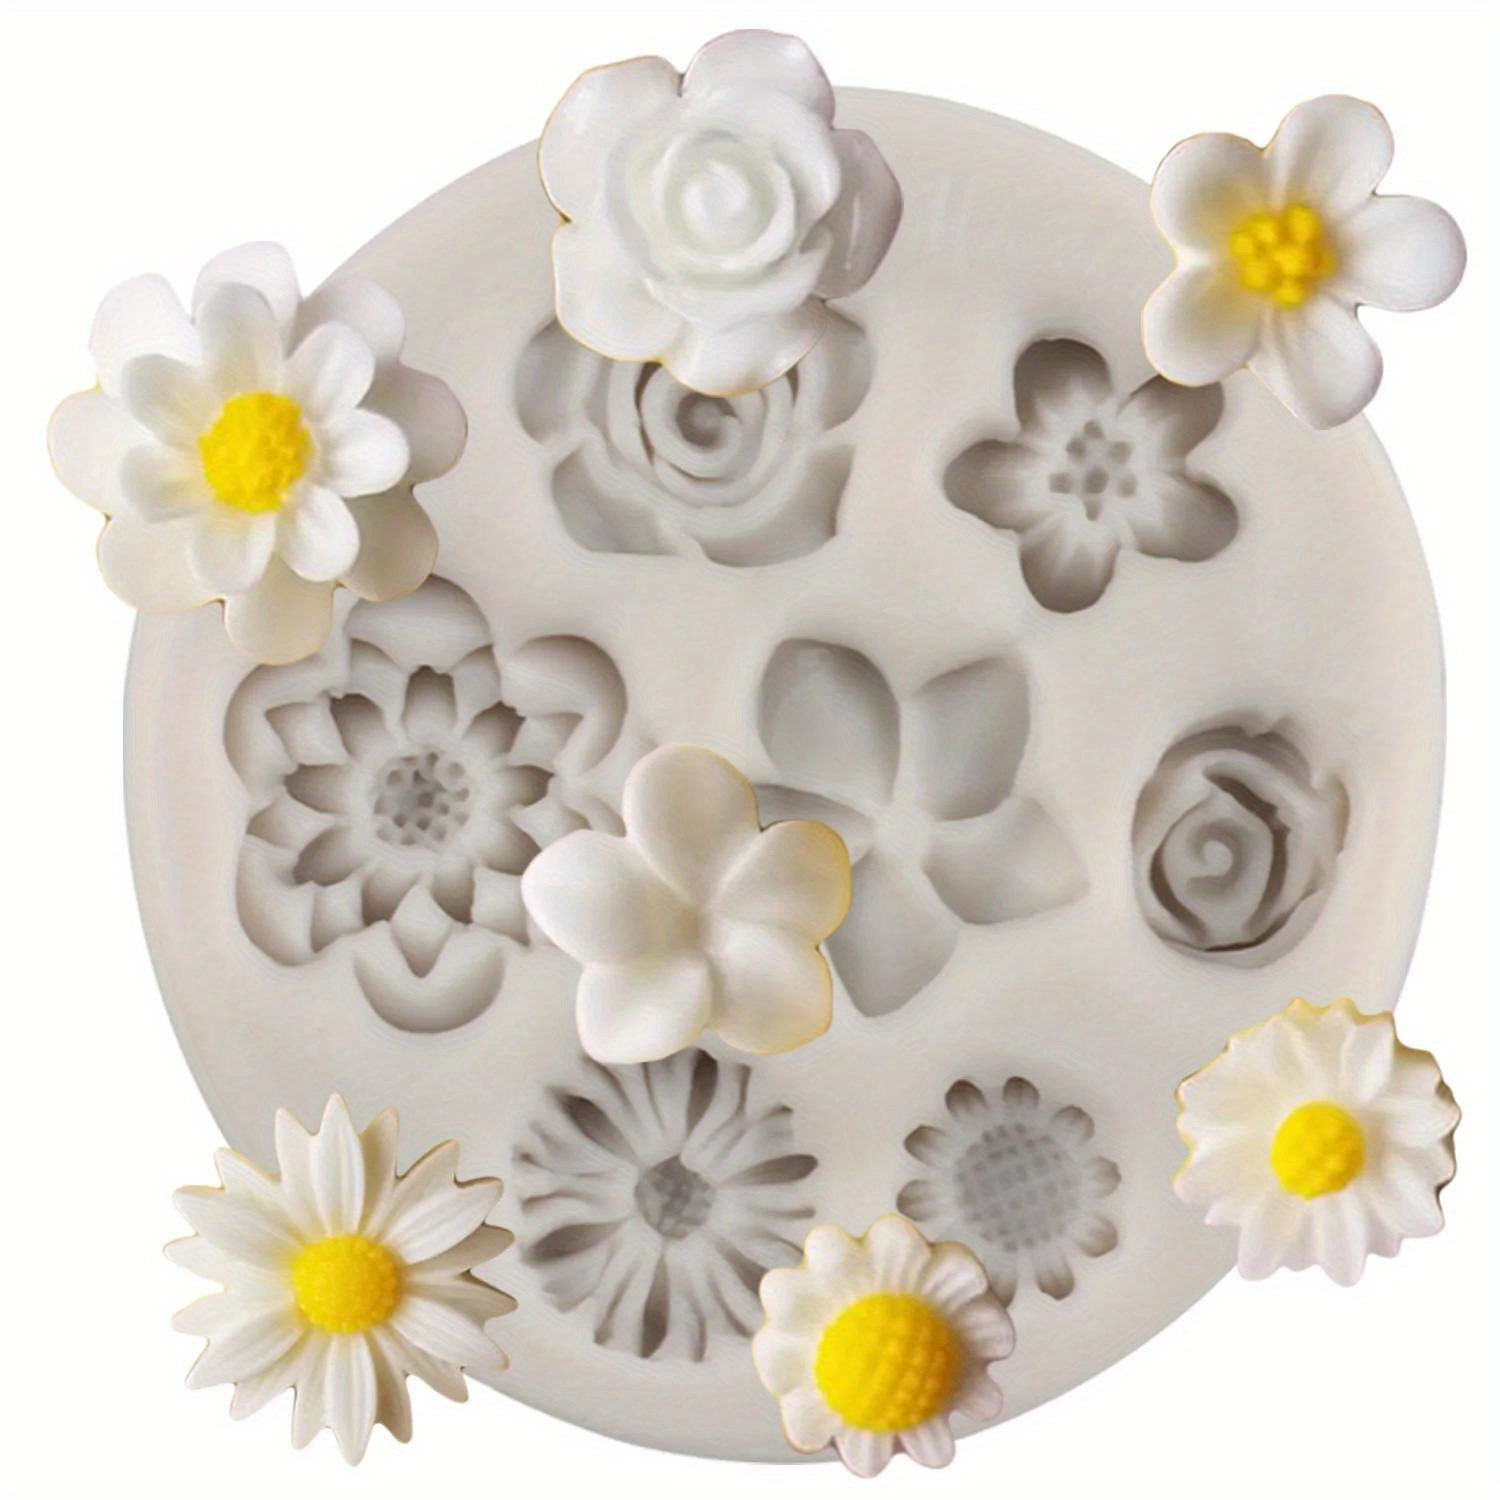 1pc, 3D Silicone Flower Chocolate Mold for DIY Cake Decorating and Baking -  Perfect for Fondant, Candy, and Kitchen Gadgets